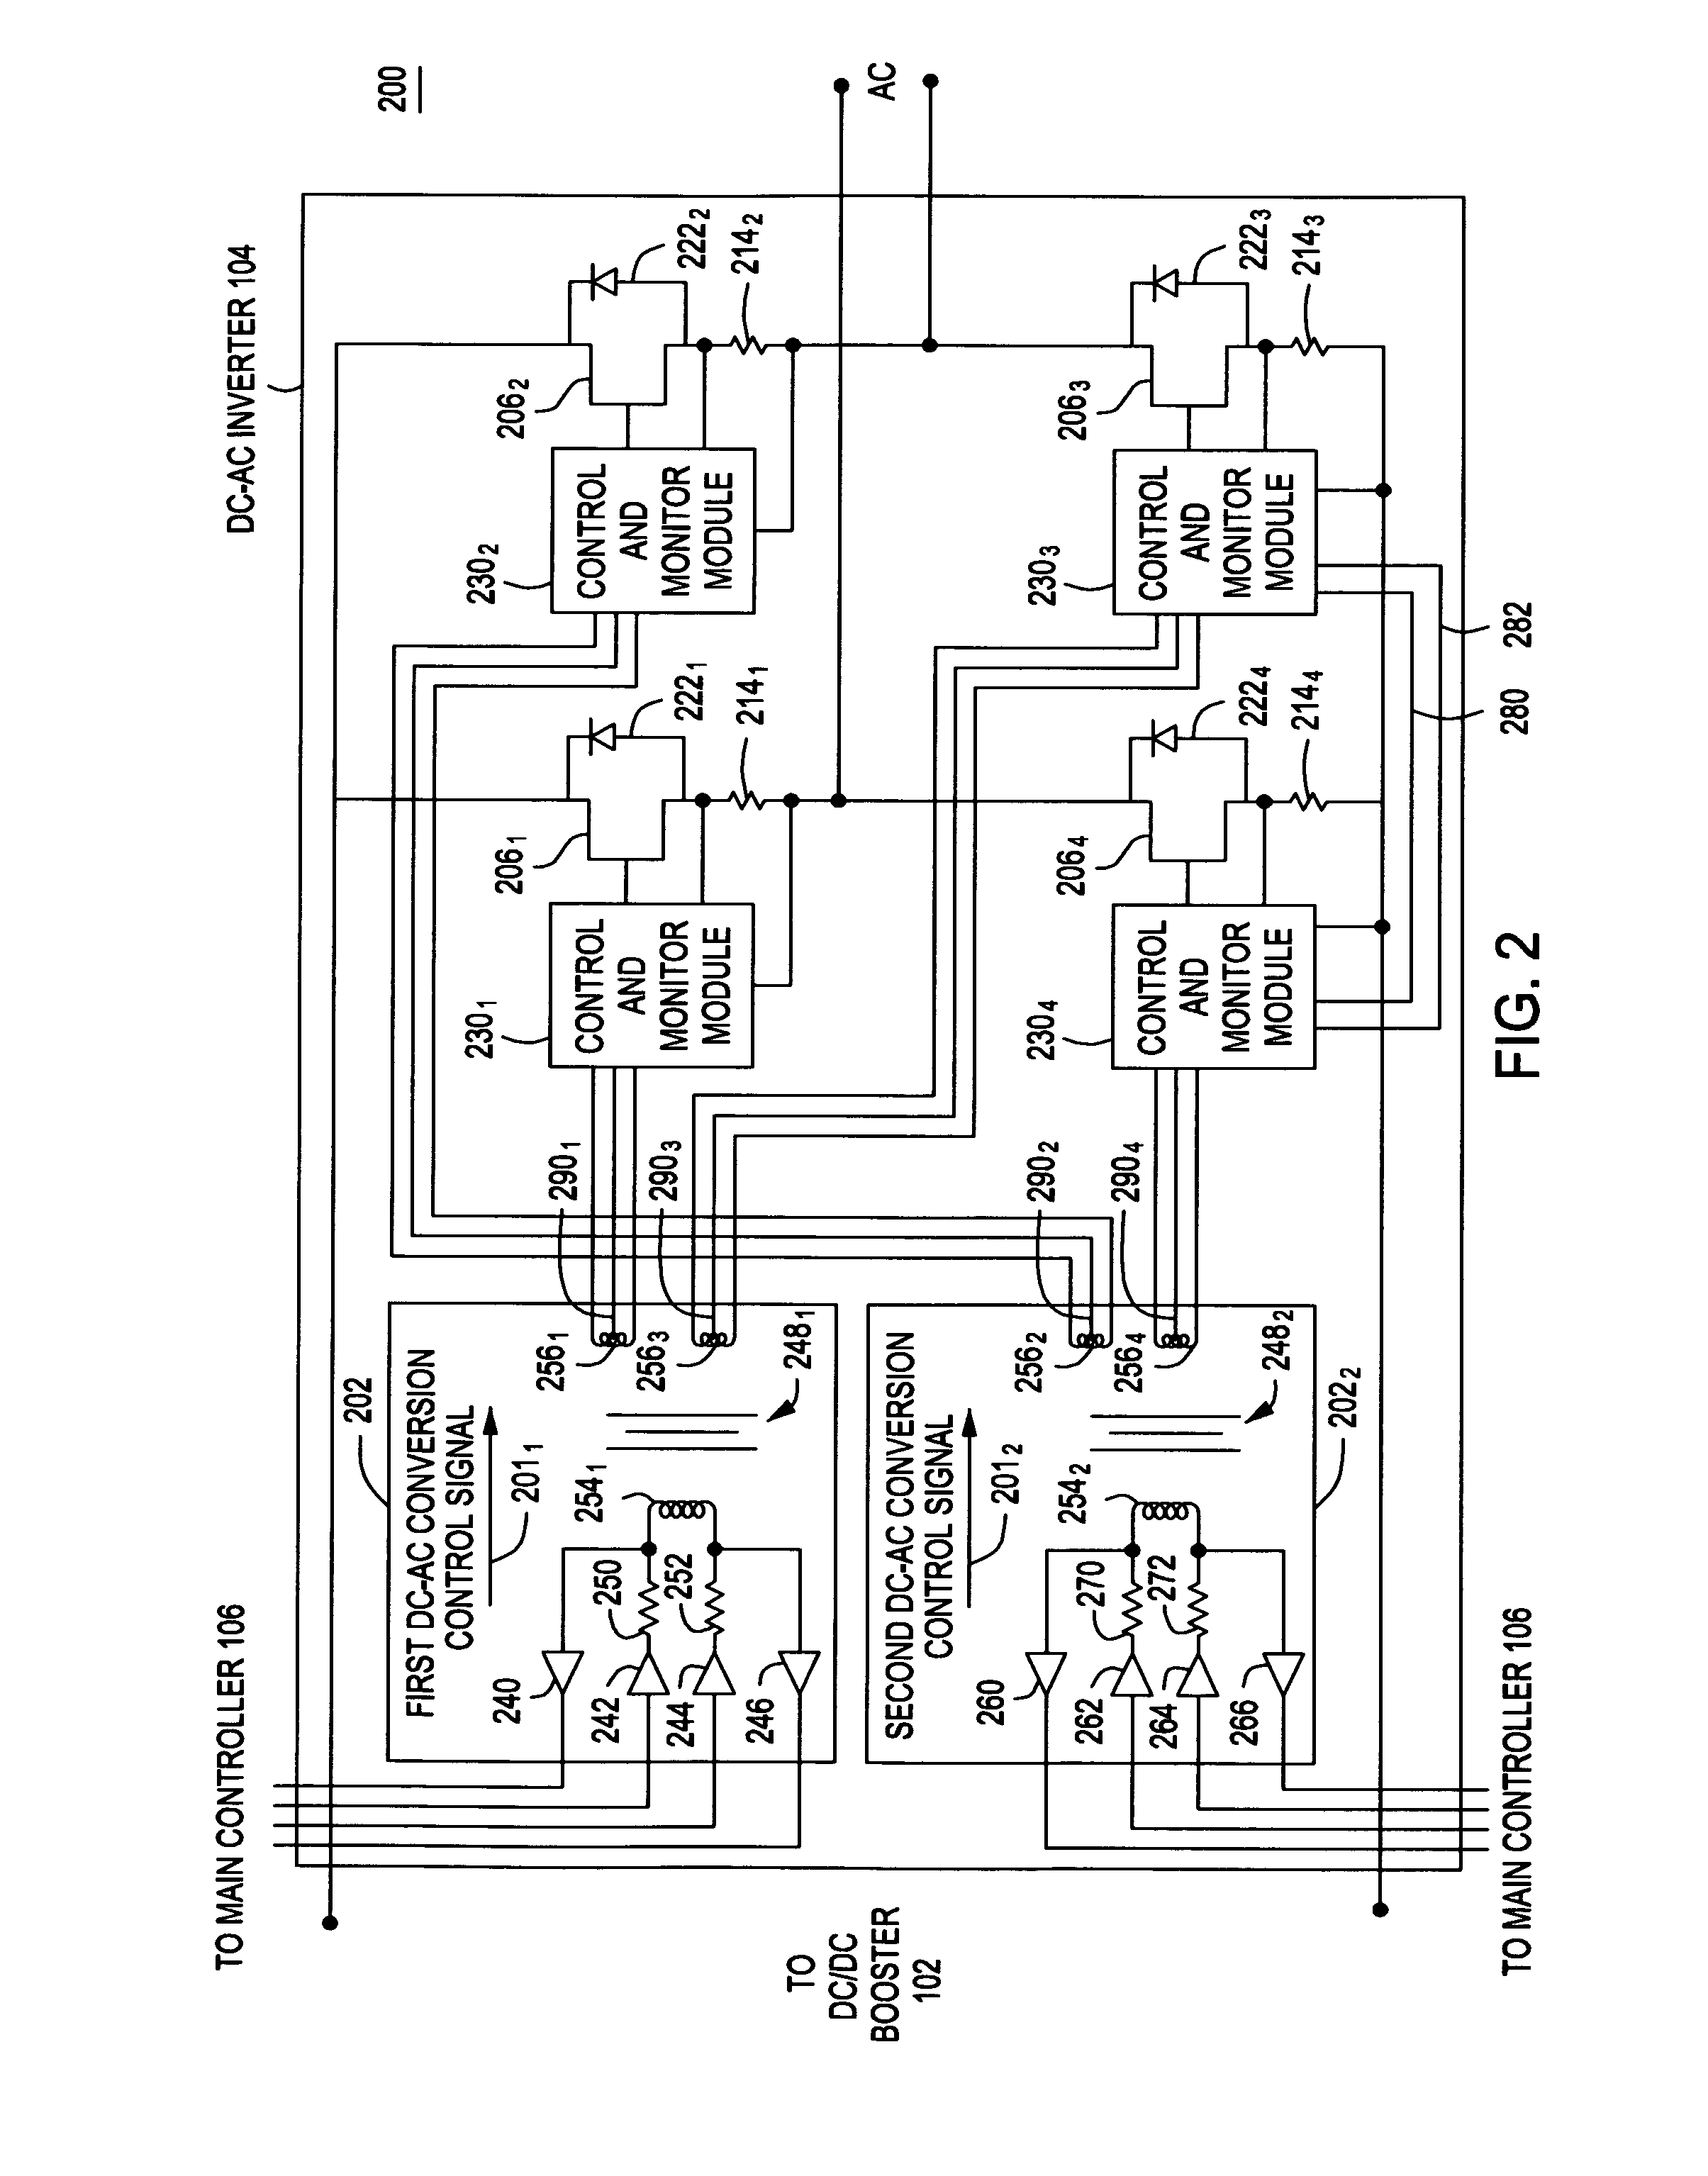 Method and apparatus for single-path control and monitoring of an H-bridge